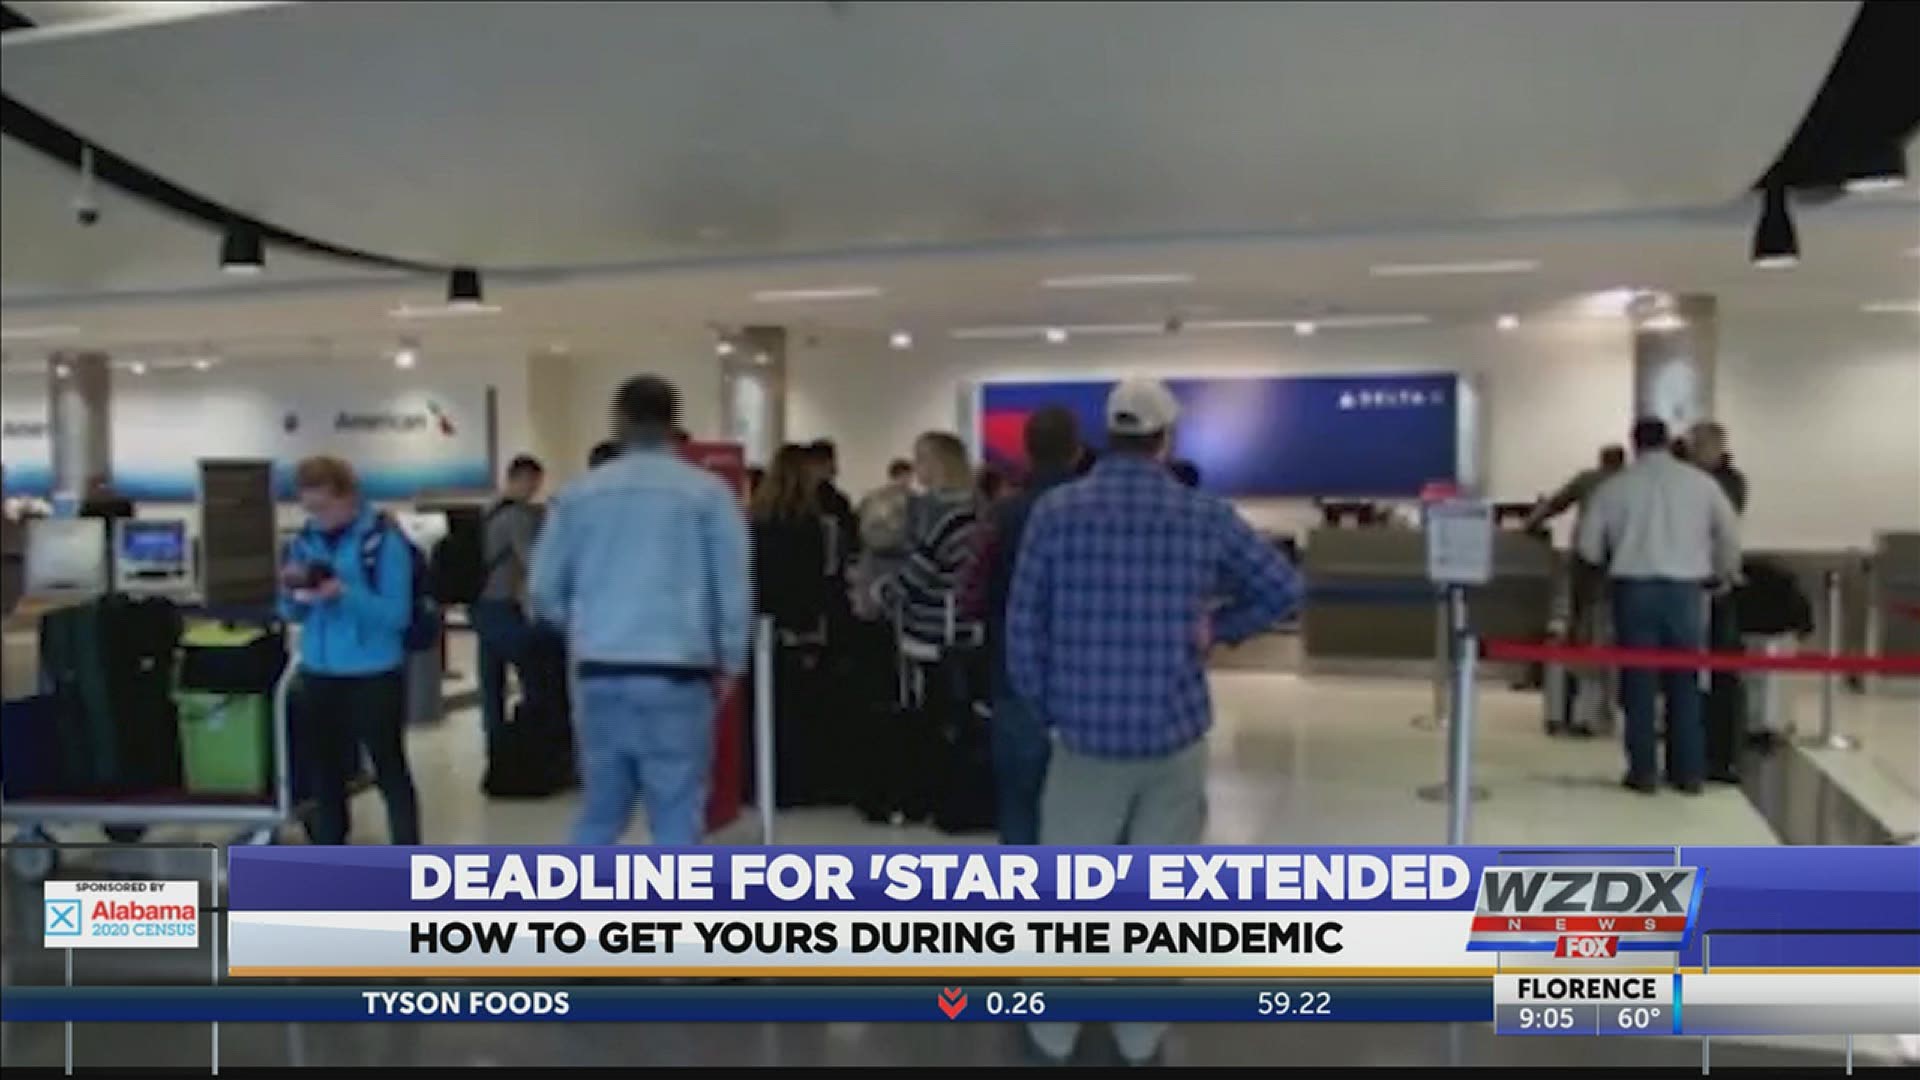 Do you have your STAR ID? If it weren’t for the pandemic, the deadline would be here. But, it has been extended.